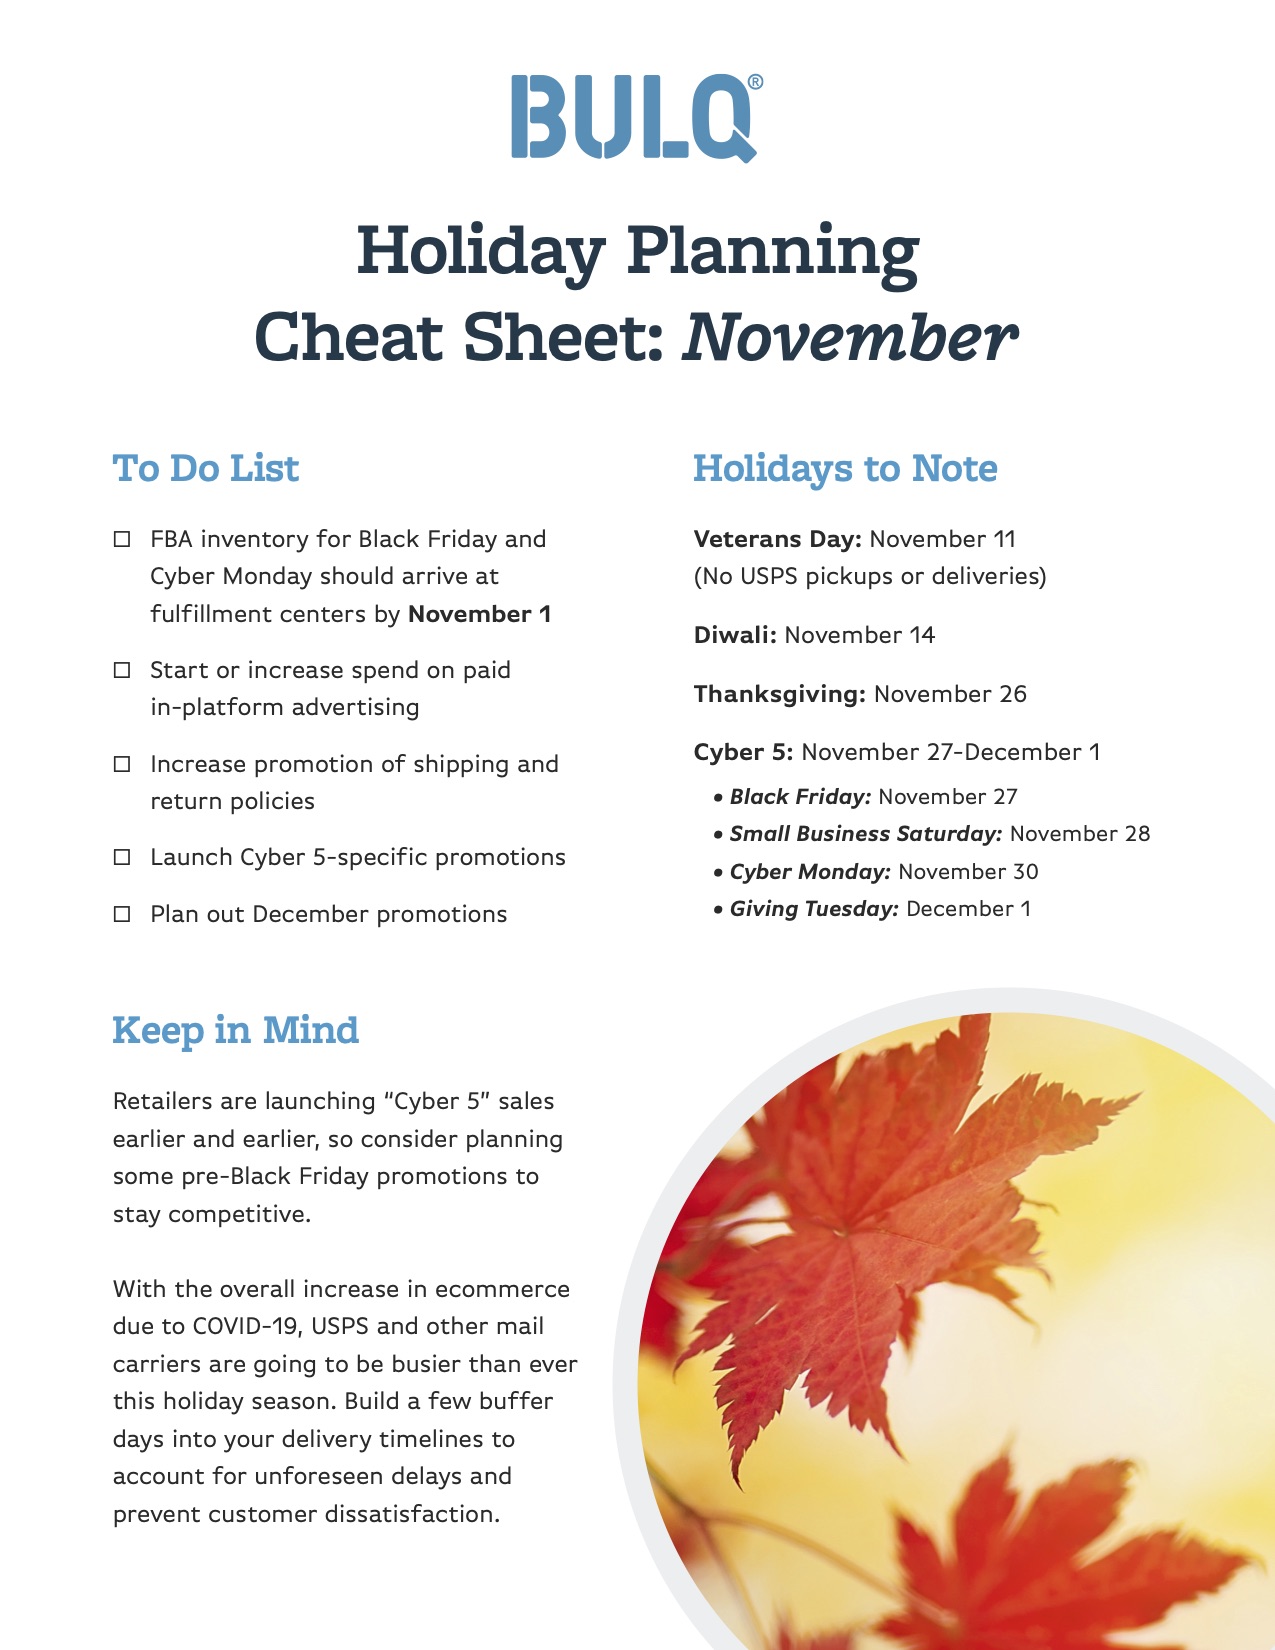 To-do checklist to help resellers prepare to sell online during Black Friday